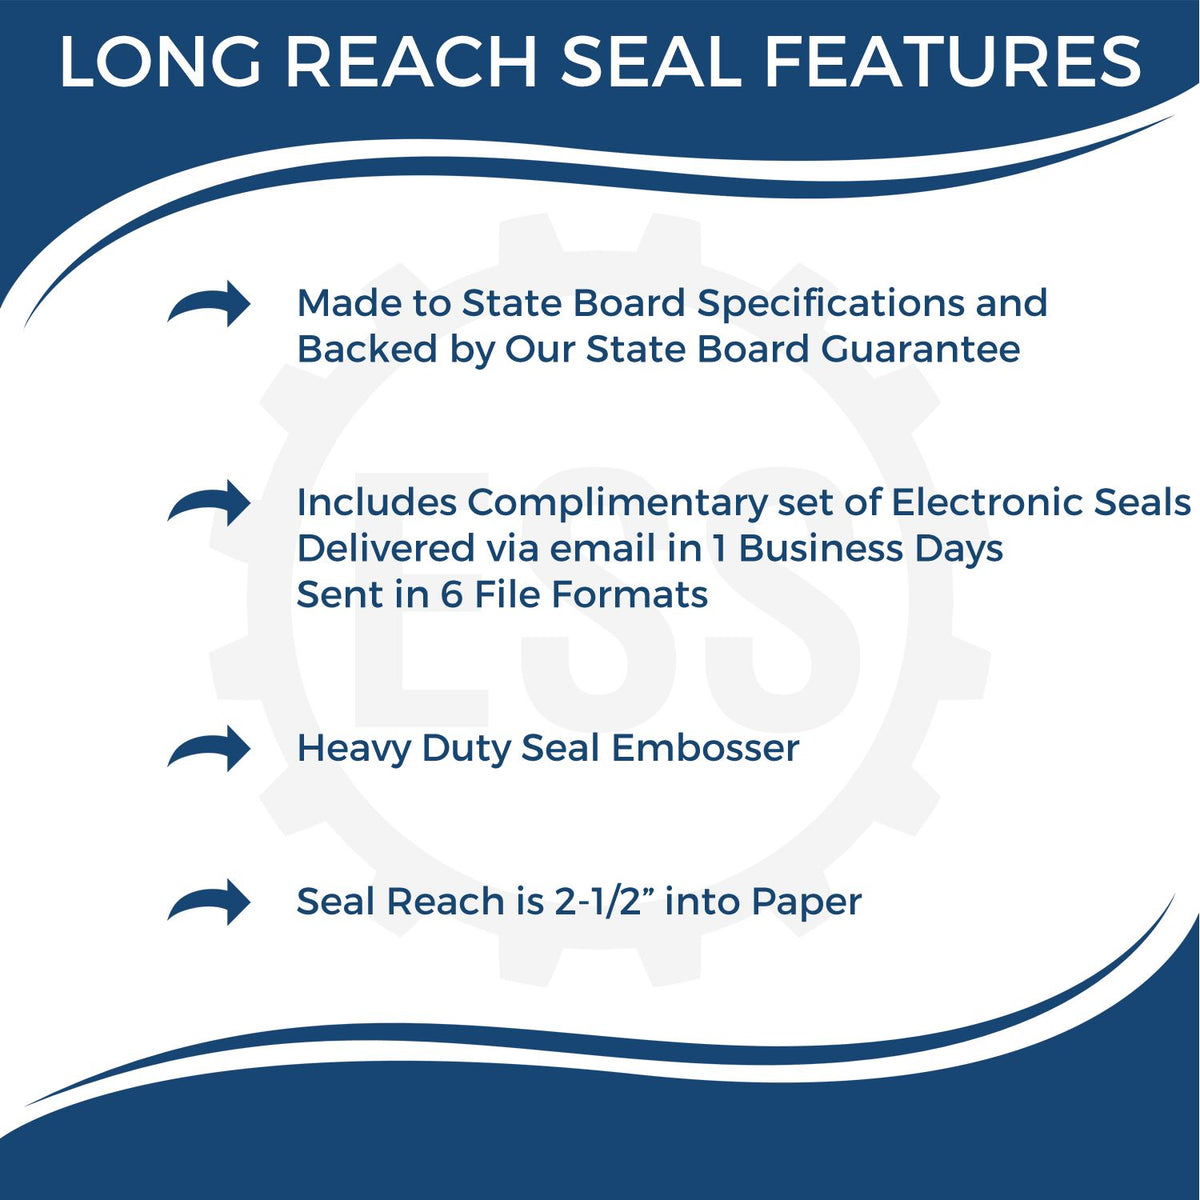 A picture of an infographic highlighting the selling points for the Long Reach Iowa Land Surveyor Seal